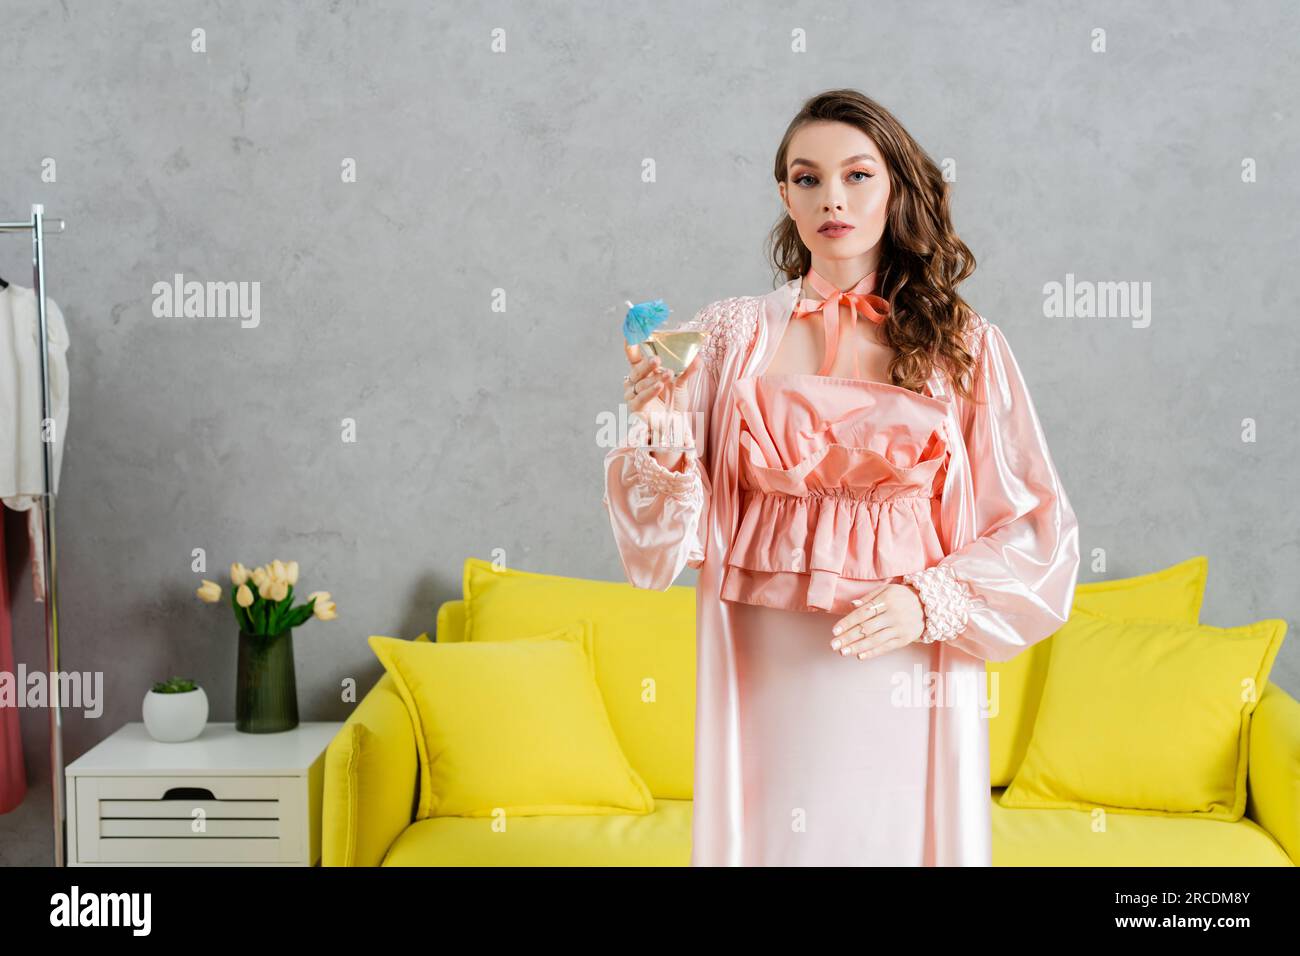 concept photography, woman acting like a doll, domestic life, housewife in pink outfit with silk robe holding cocktail in glass, gesturing and standin Stock Photo